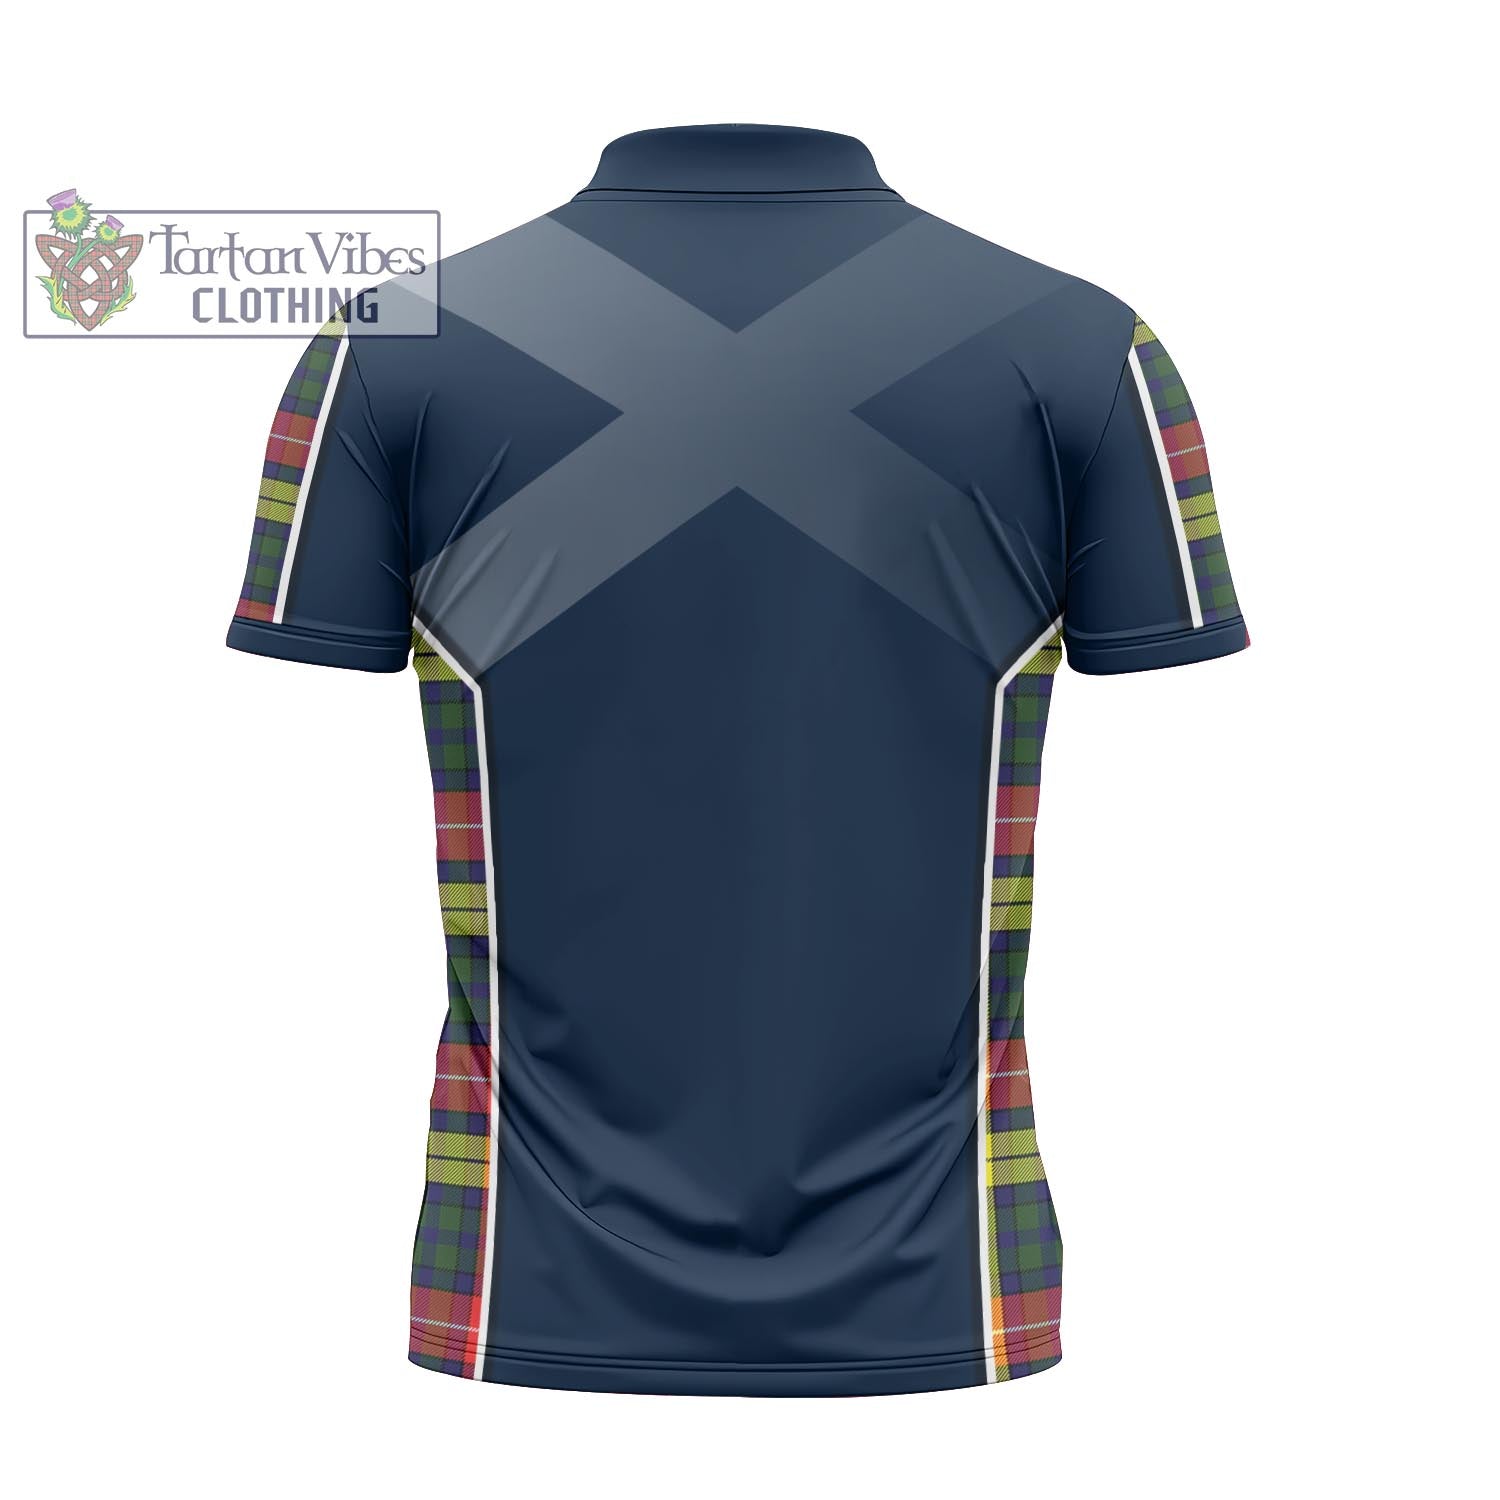 Tartan Vibes Clothing Dewar Tartan Zipper Polo Shirt with Family Crest and Scottish Thistle Vibes Sport Style